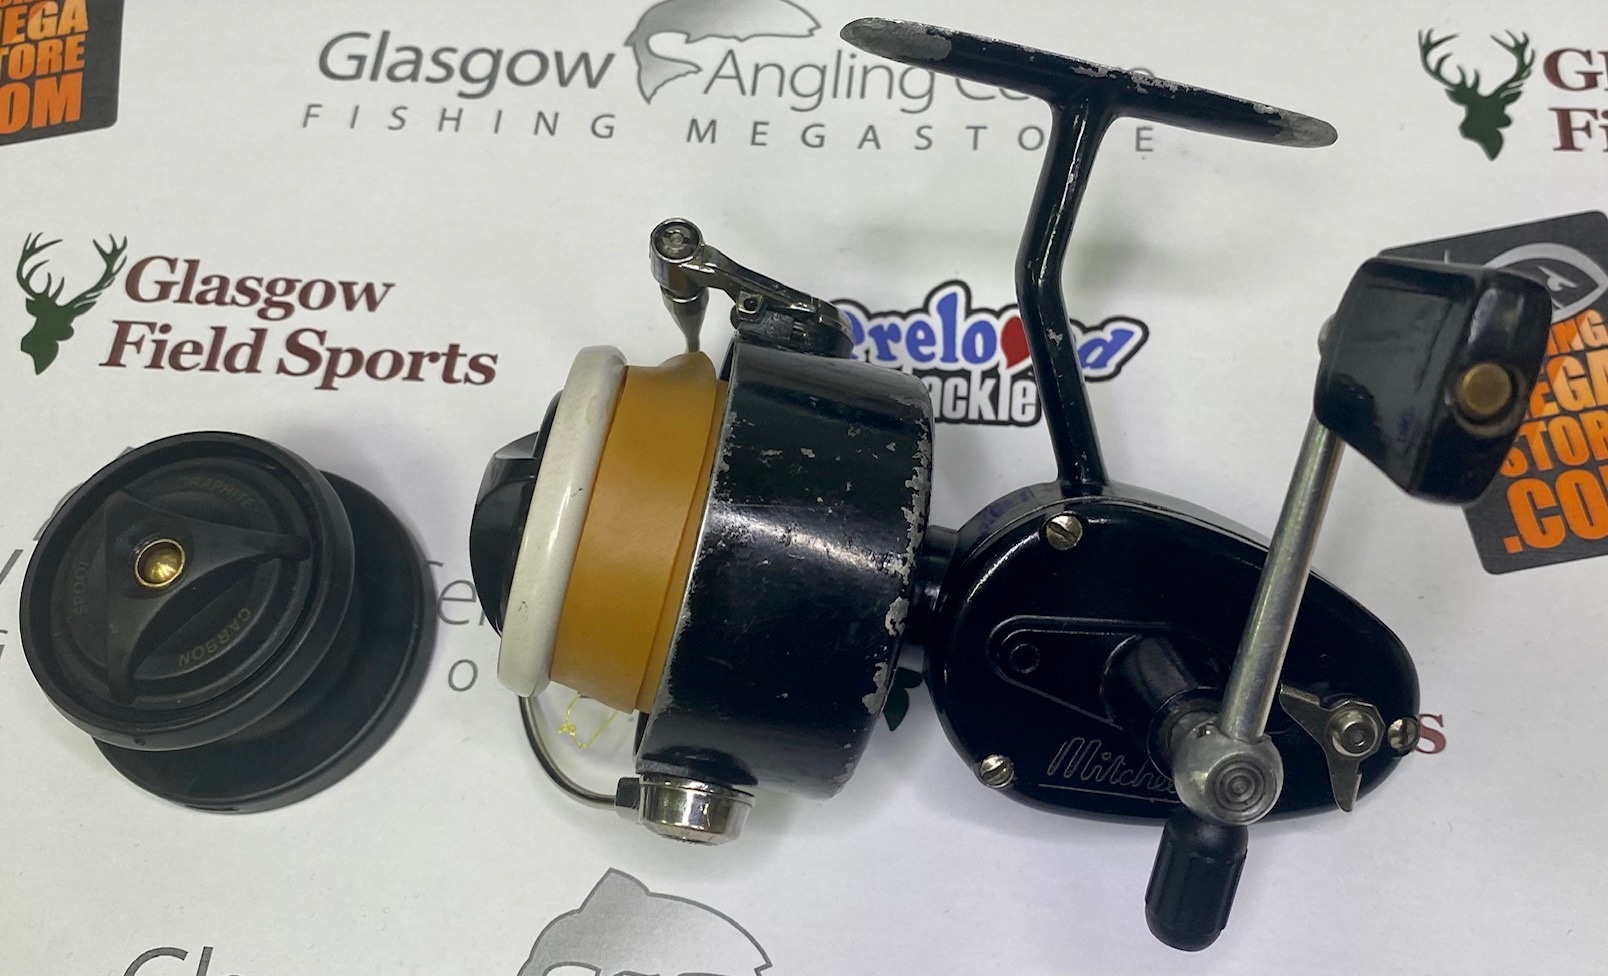 Preloved Mitchell Mitchell 300 reel made in France with spare spool (no box)  - Used – Glasgow Angling Centre